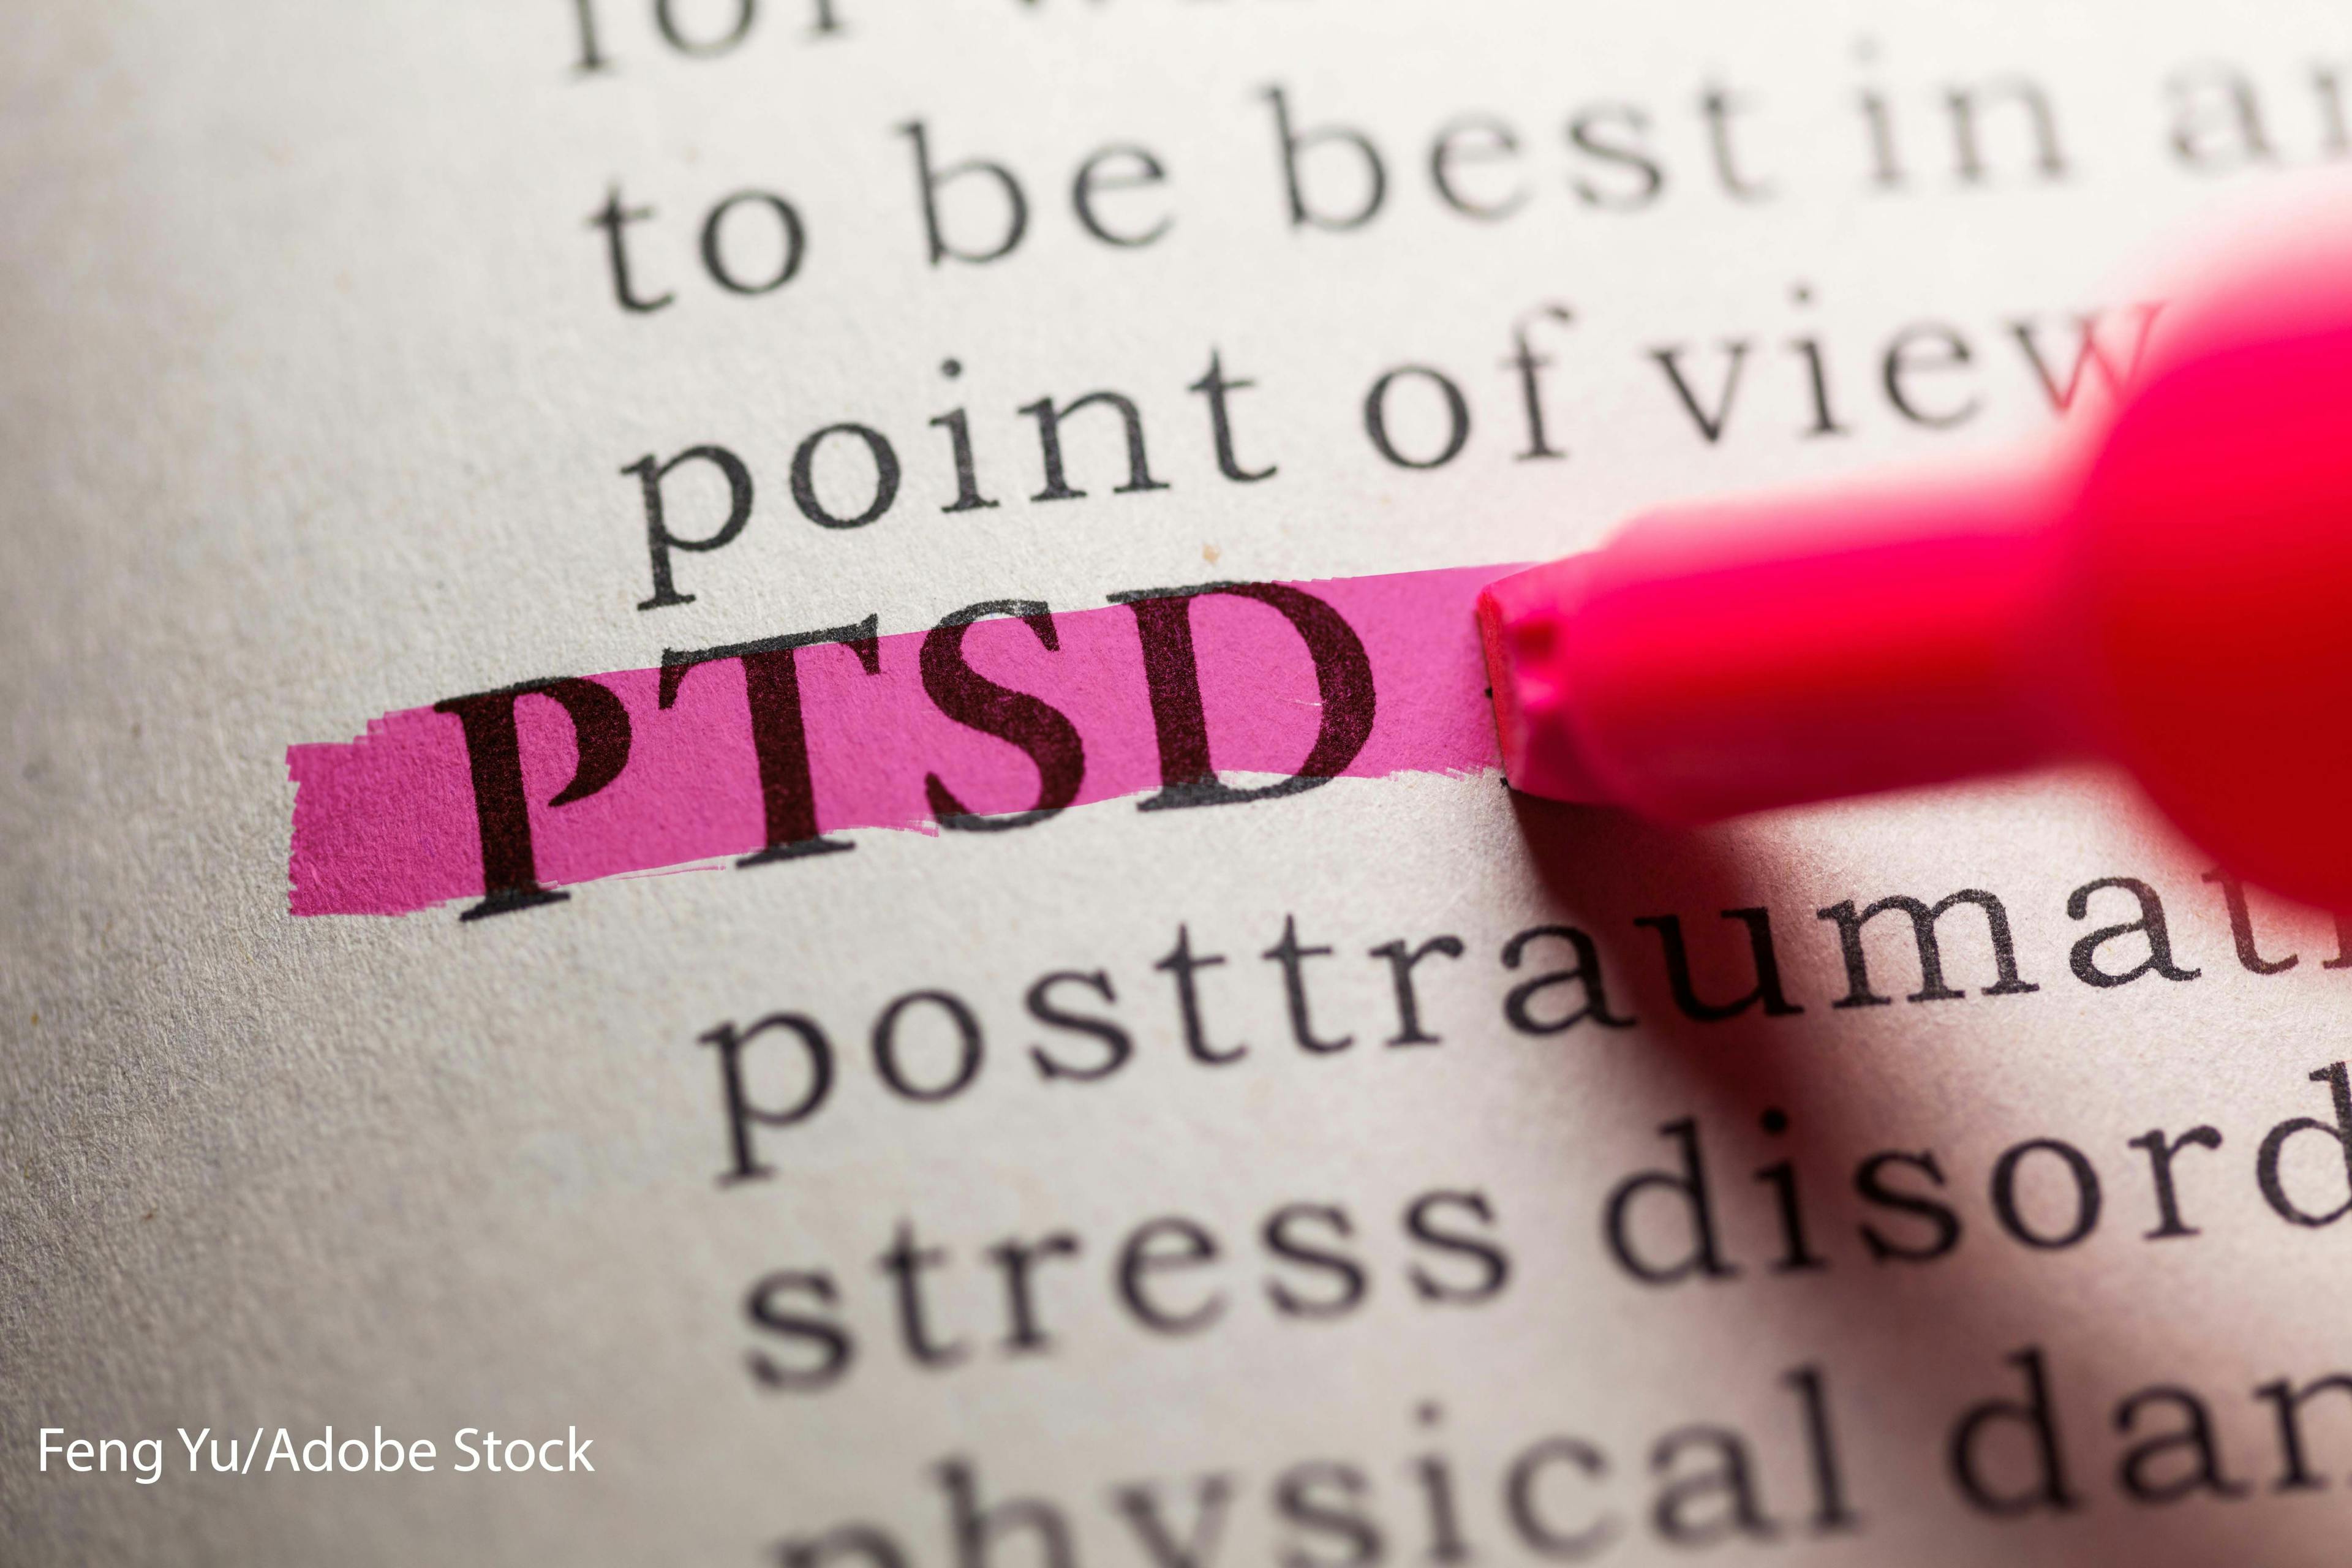 PTSD Associated with Higher Risk of Ovarian Cancer